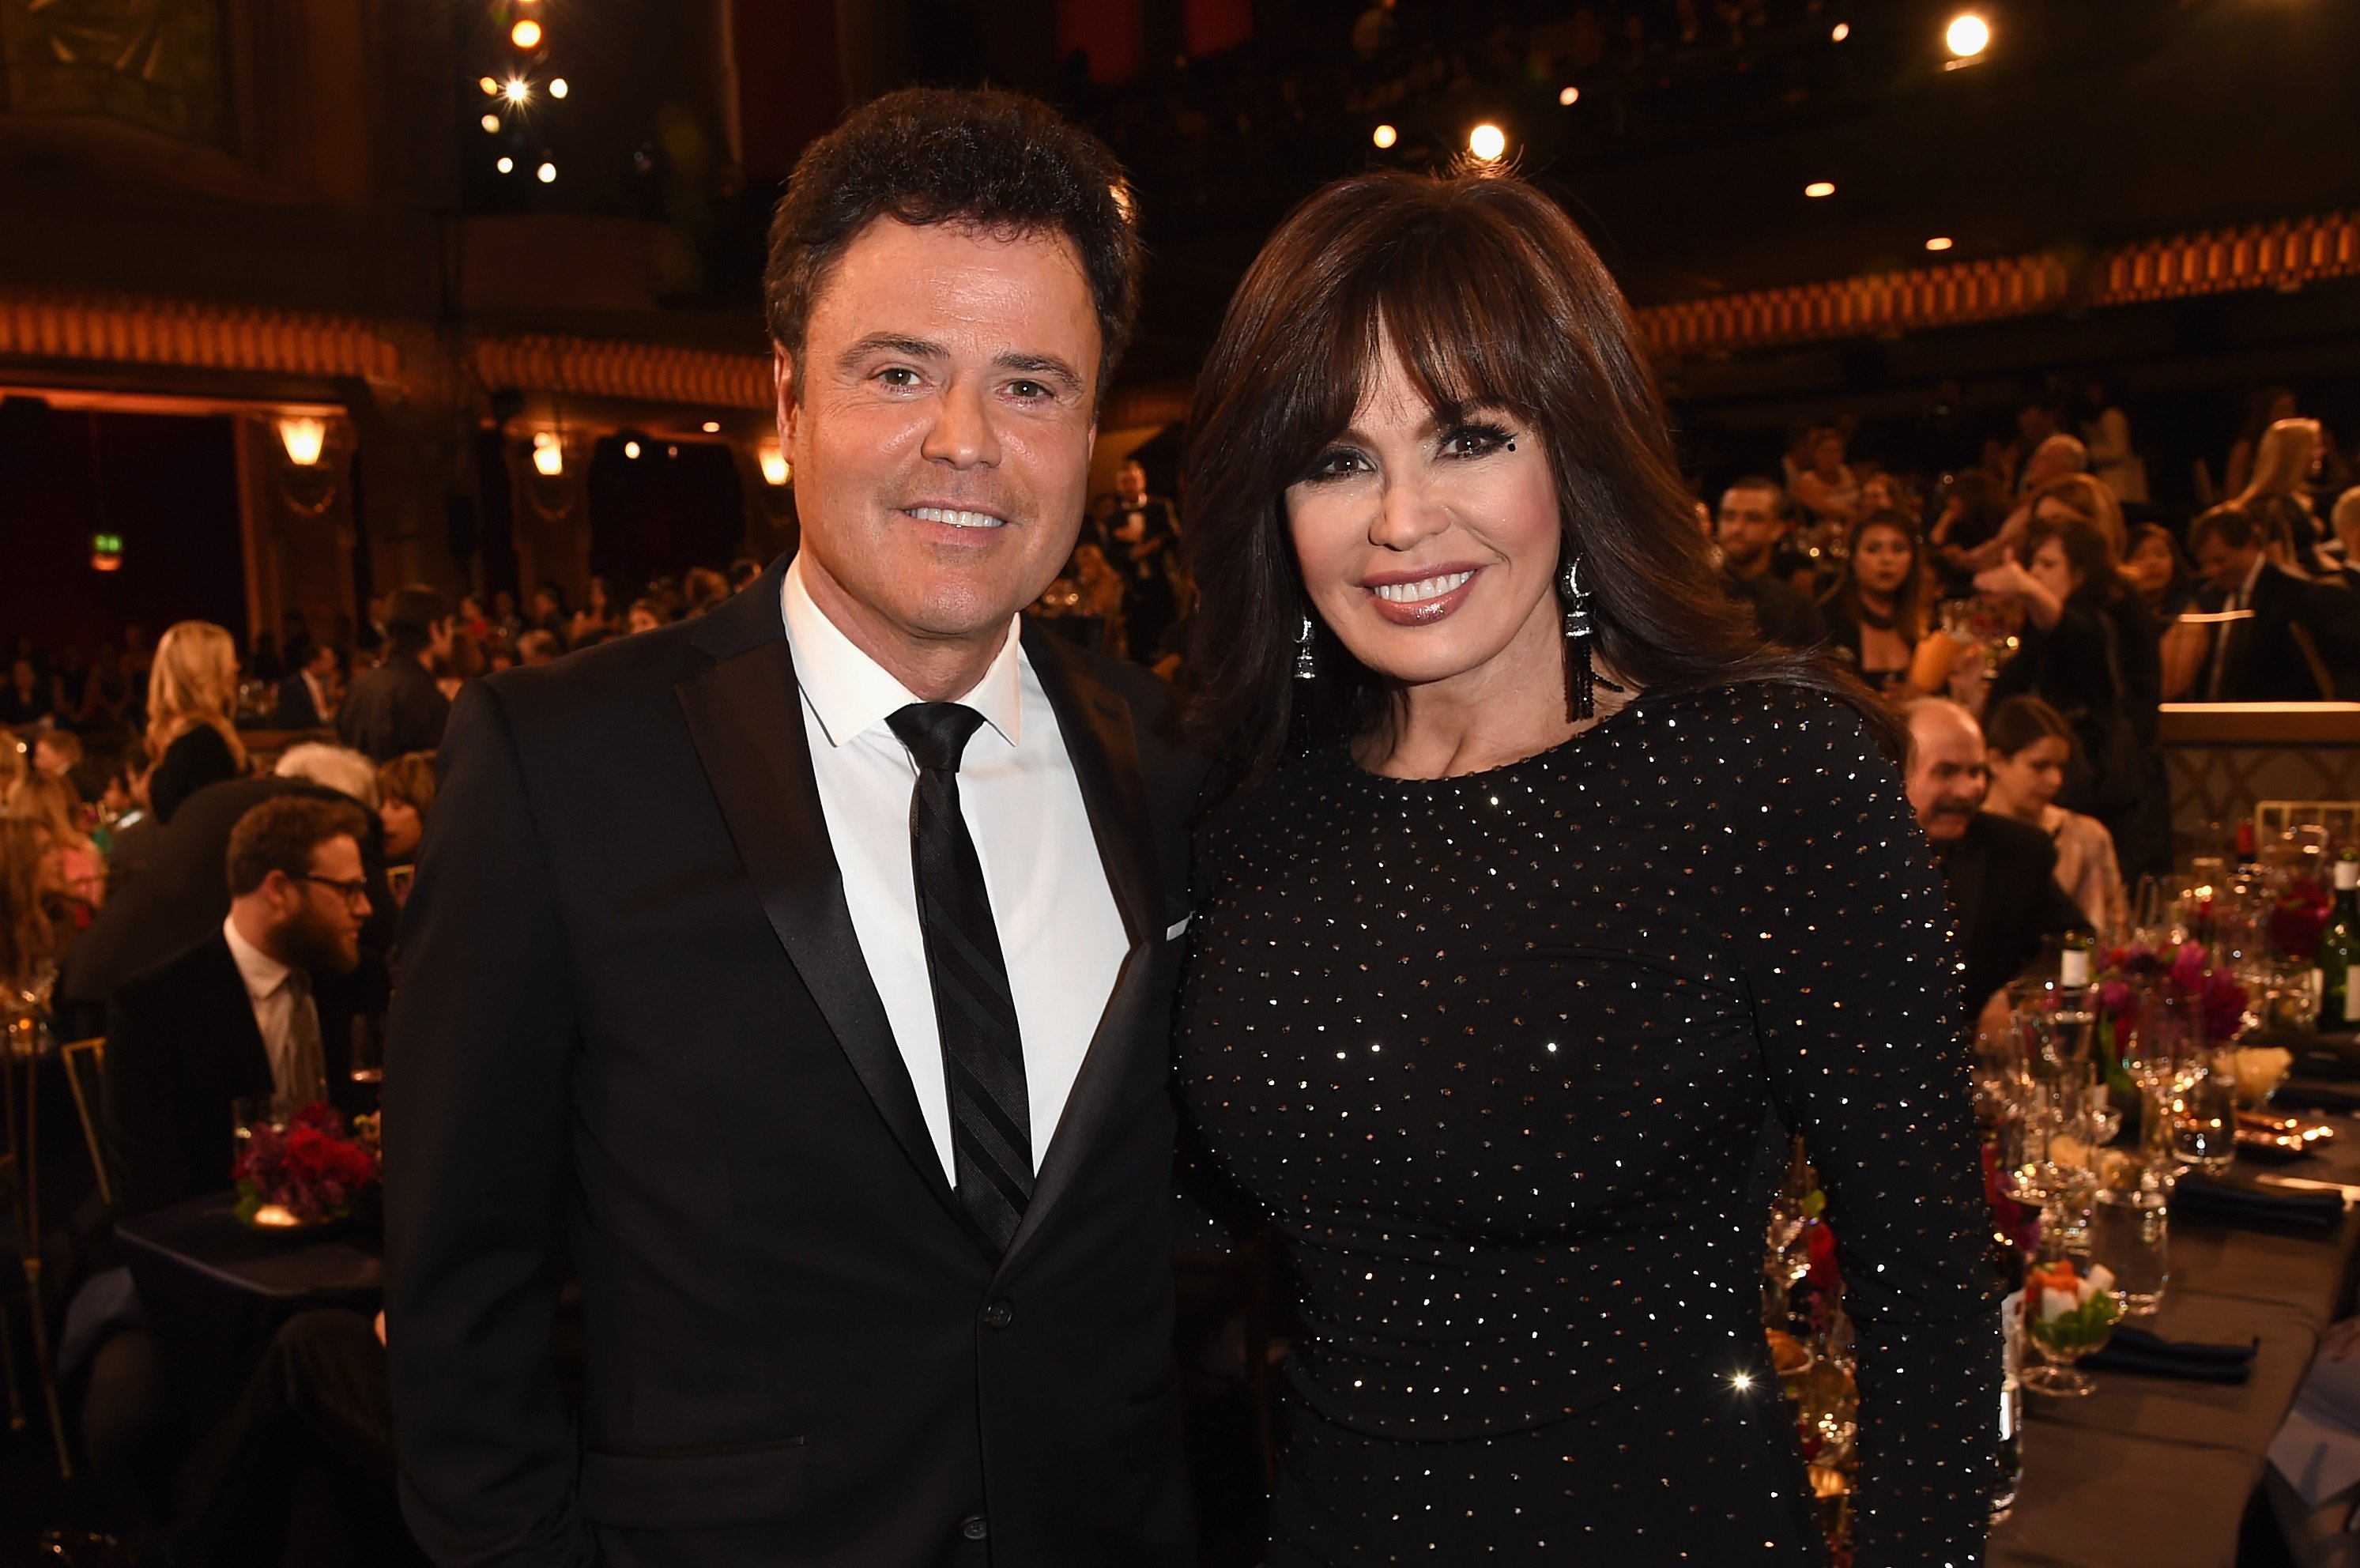 Donny and Marie Osmond attend the TV Land Awards in Beverly Hills, California on April 11, 2015 | Photo: Getty Images